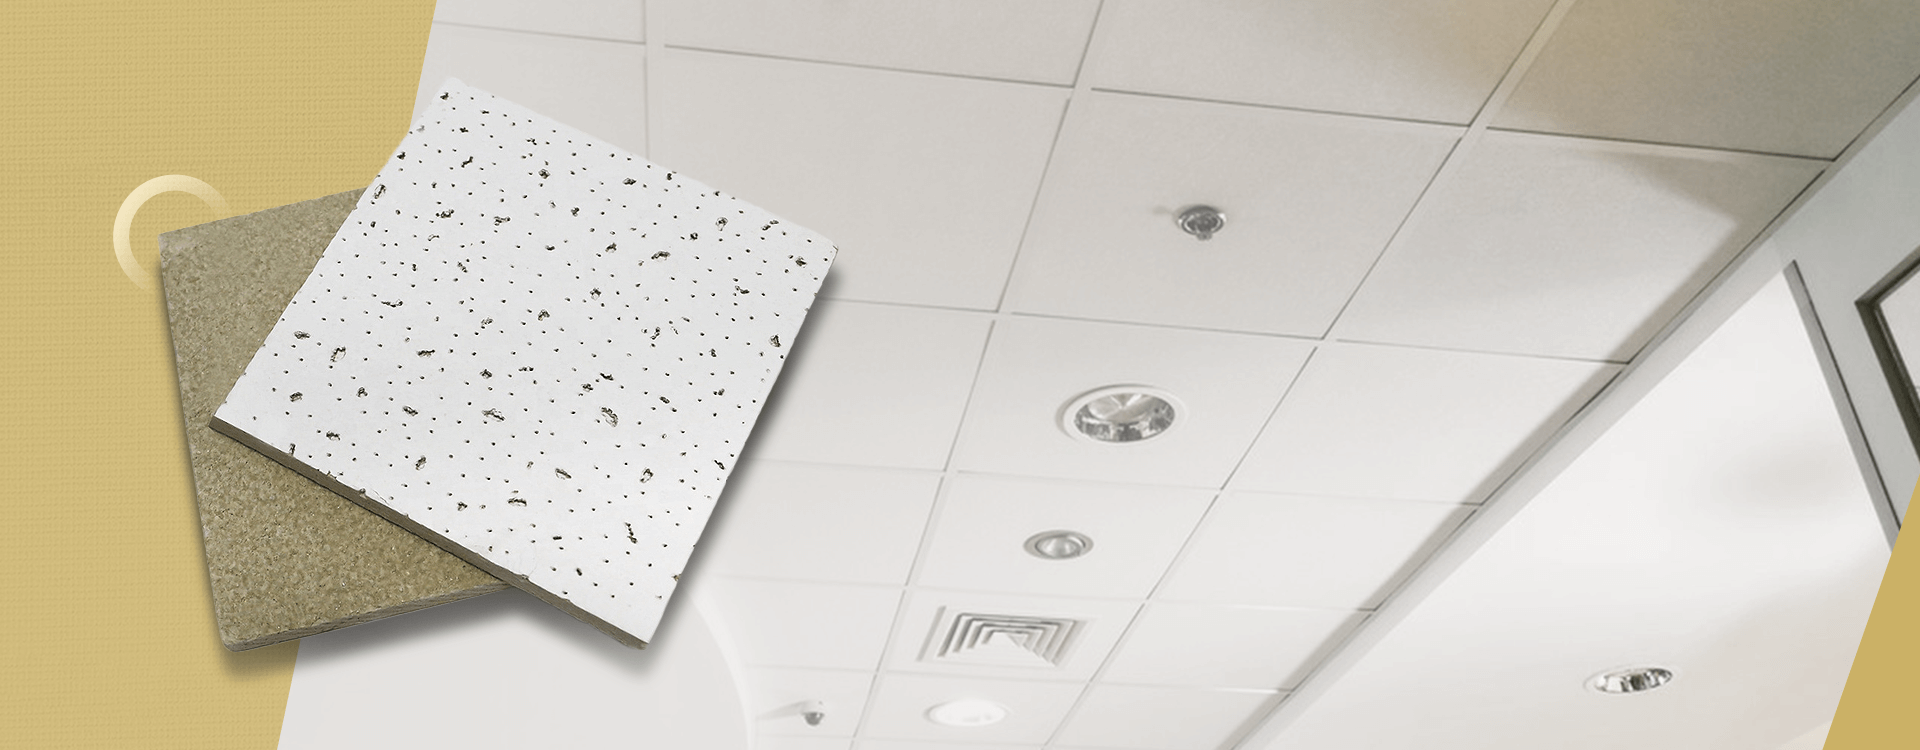 Diverse Ceiling Products to Fulfill Your Procurement Needs: Gypsum Ceiling, Mineral Fiber Acoustic Ceiling, PVC Ceiling, Aluminum Ceiling, Gypsum Molding, T-Grid